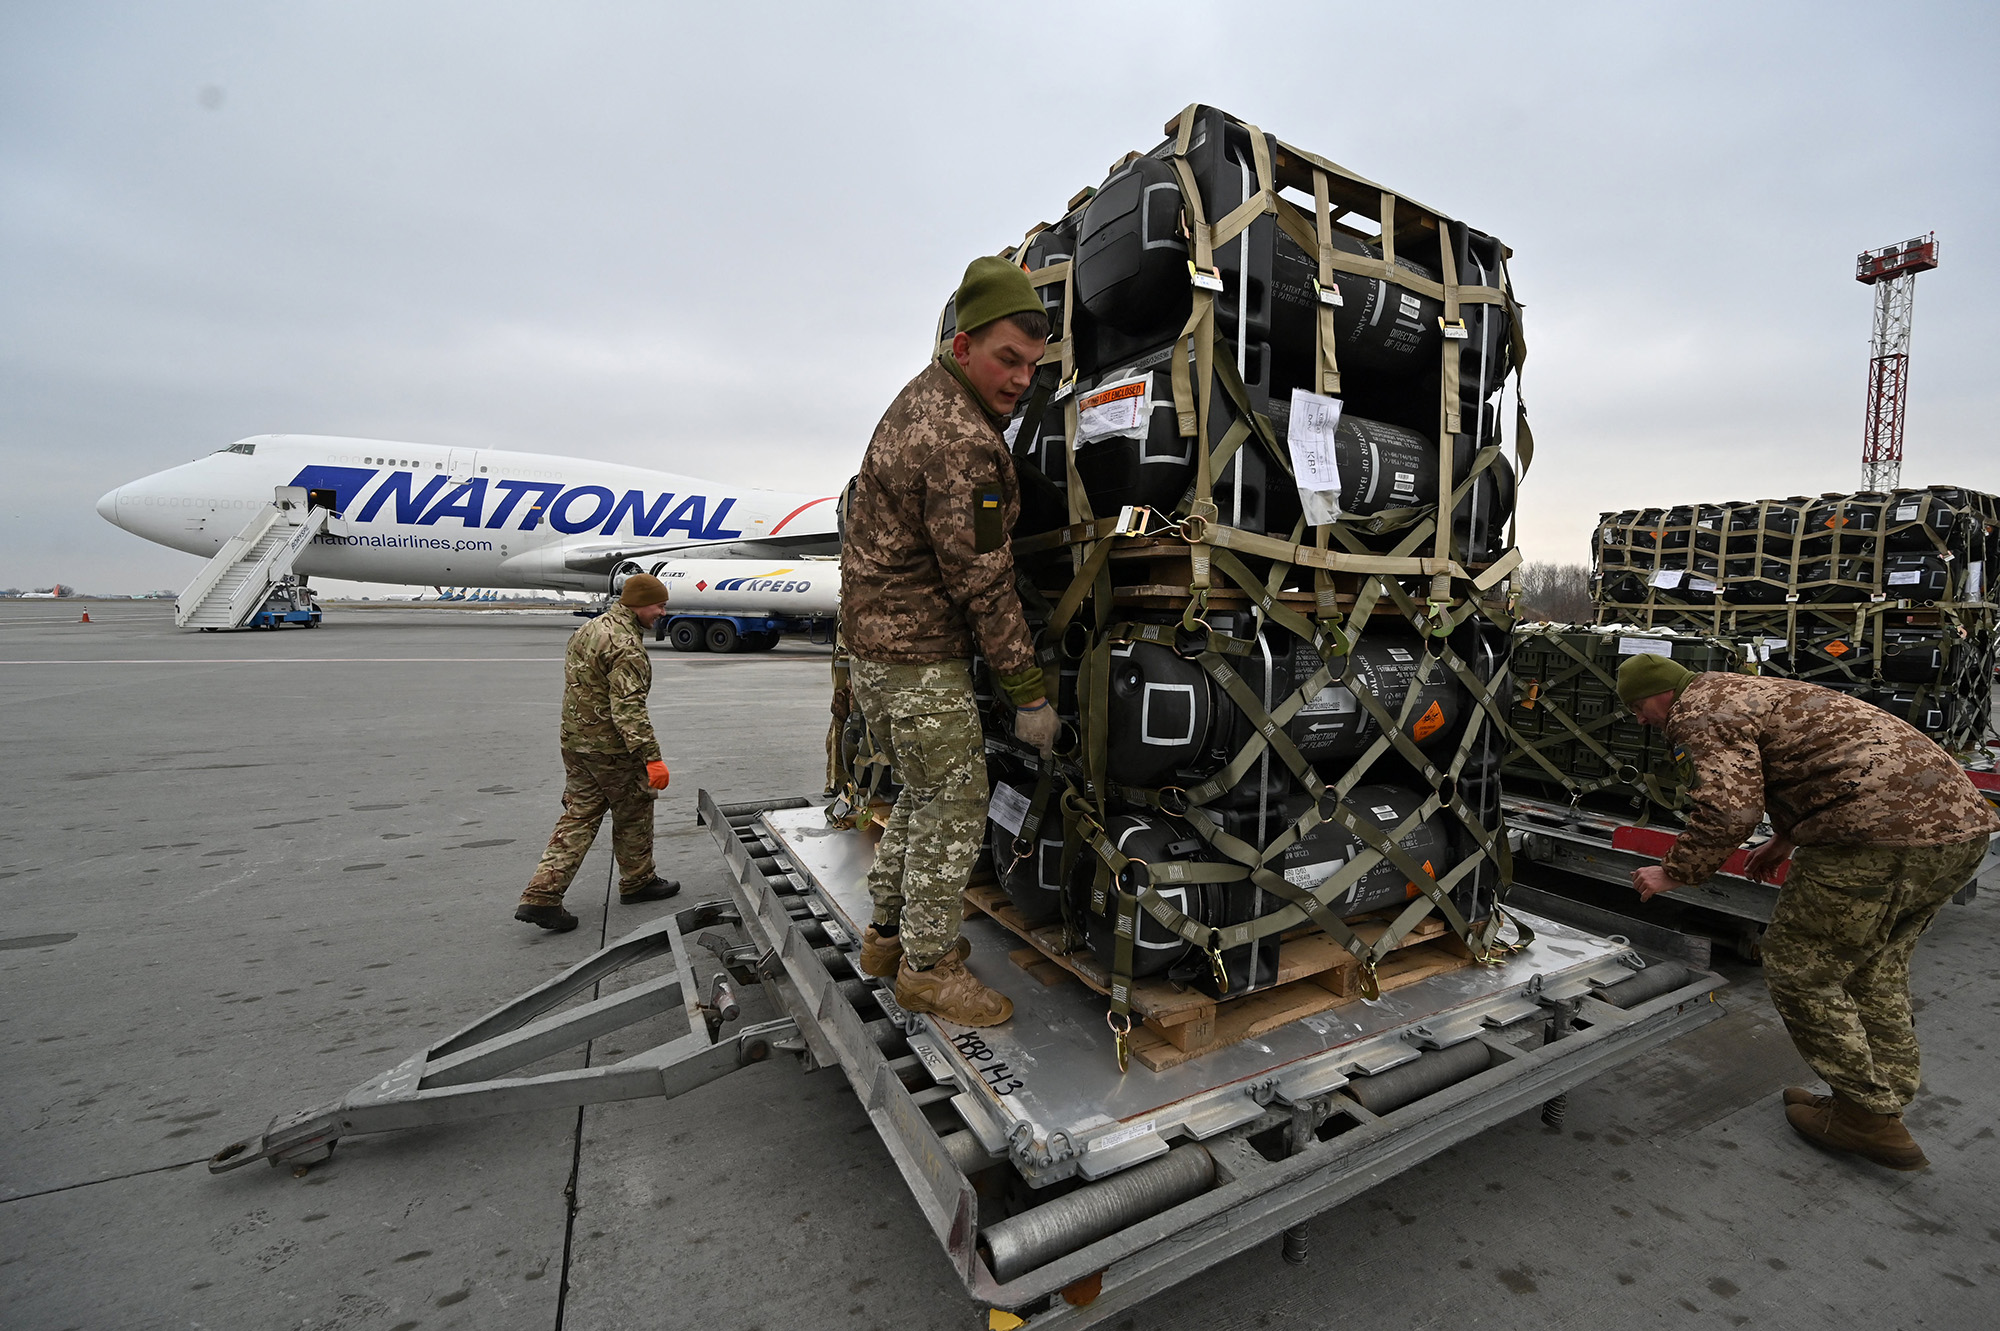 Ukrainian servicemen take delivery of FGM-148 Javelins, anti-tank missiles provided by the United States, at Kyiv's Boryspil airport on February 11.